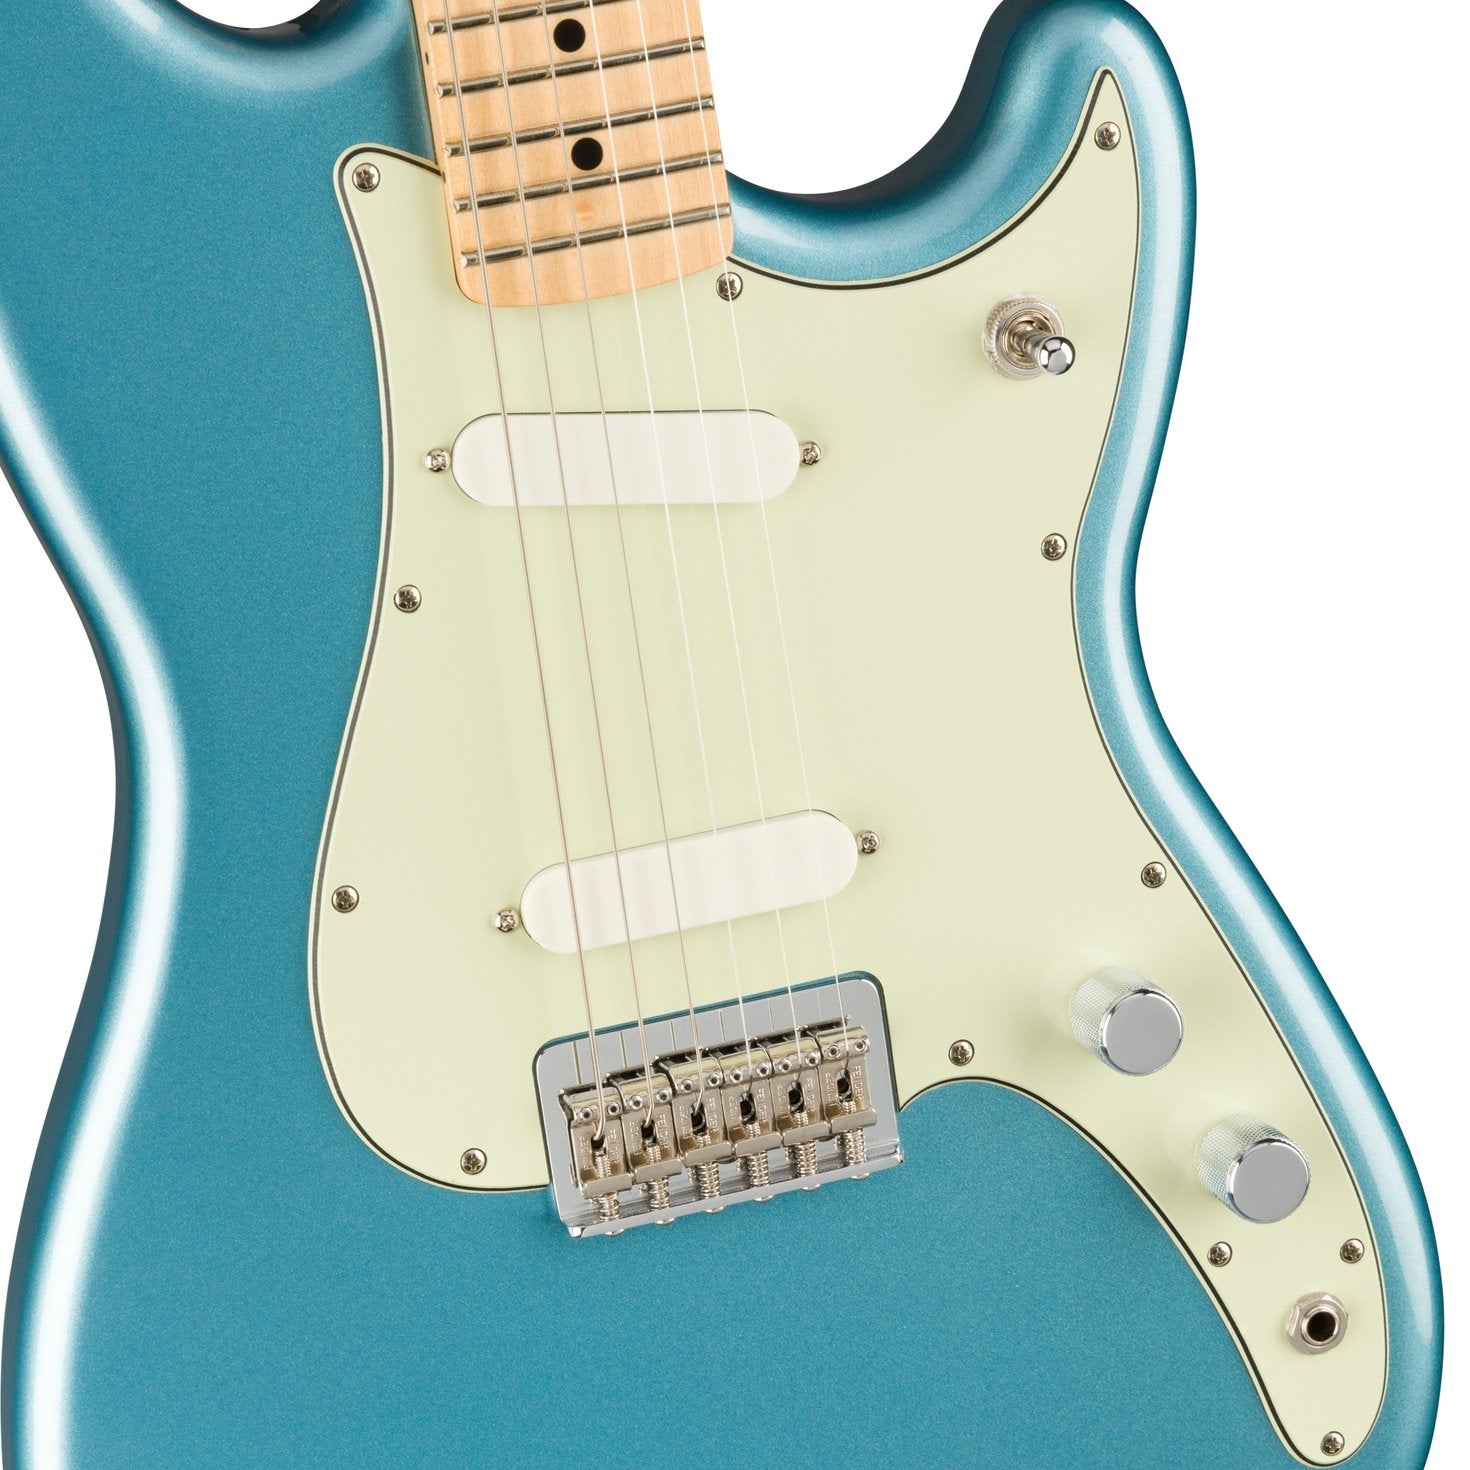 Fender Player Duo-Sonic Electric Guitar, Maple FB, Tidepool, FENDER, ELECTRIC GUITAR, fender-eletric-guitar-f03-014-4012-513, ZOSO MUSIC SDN BHD